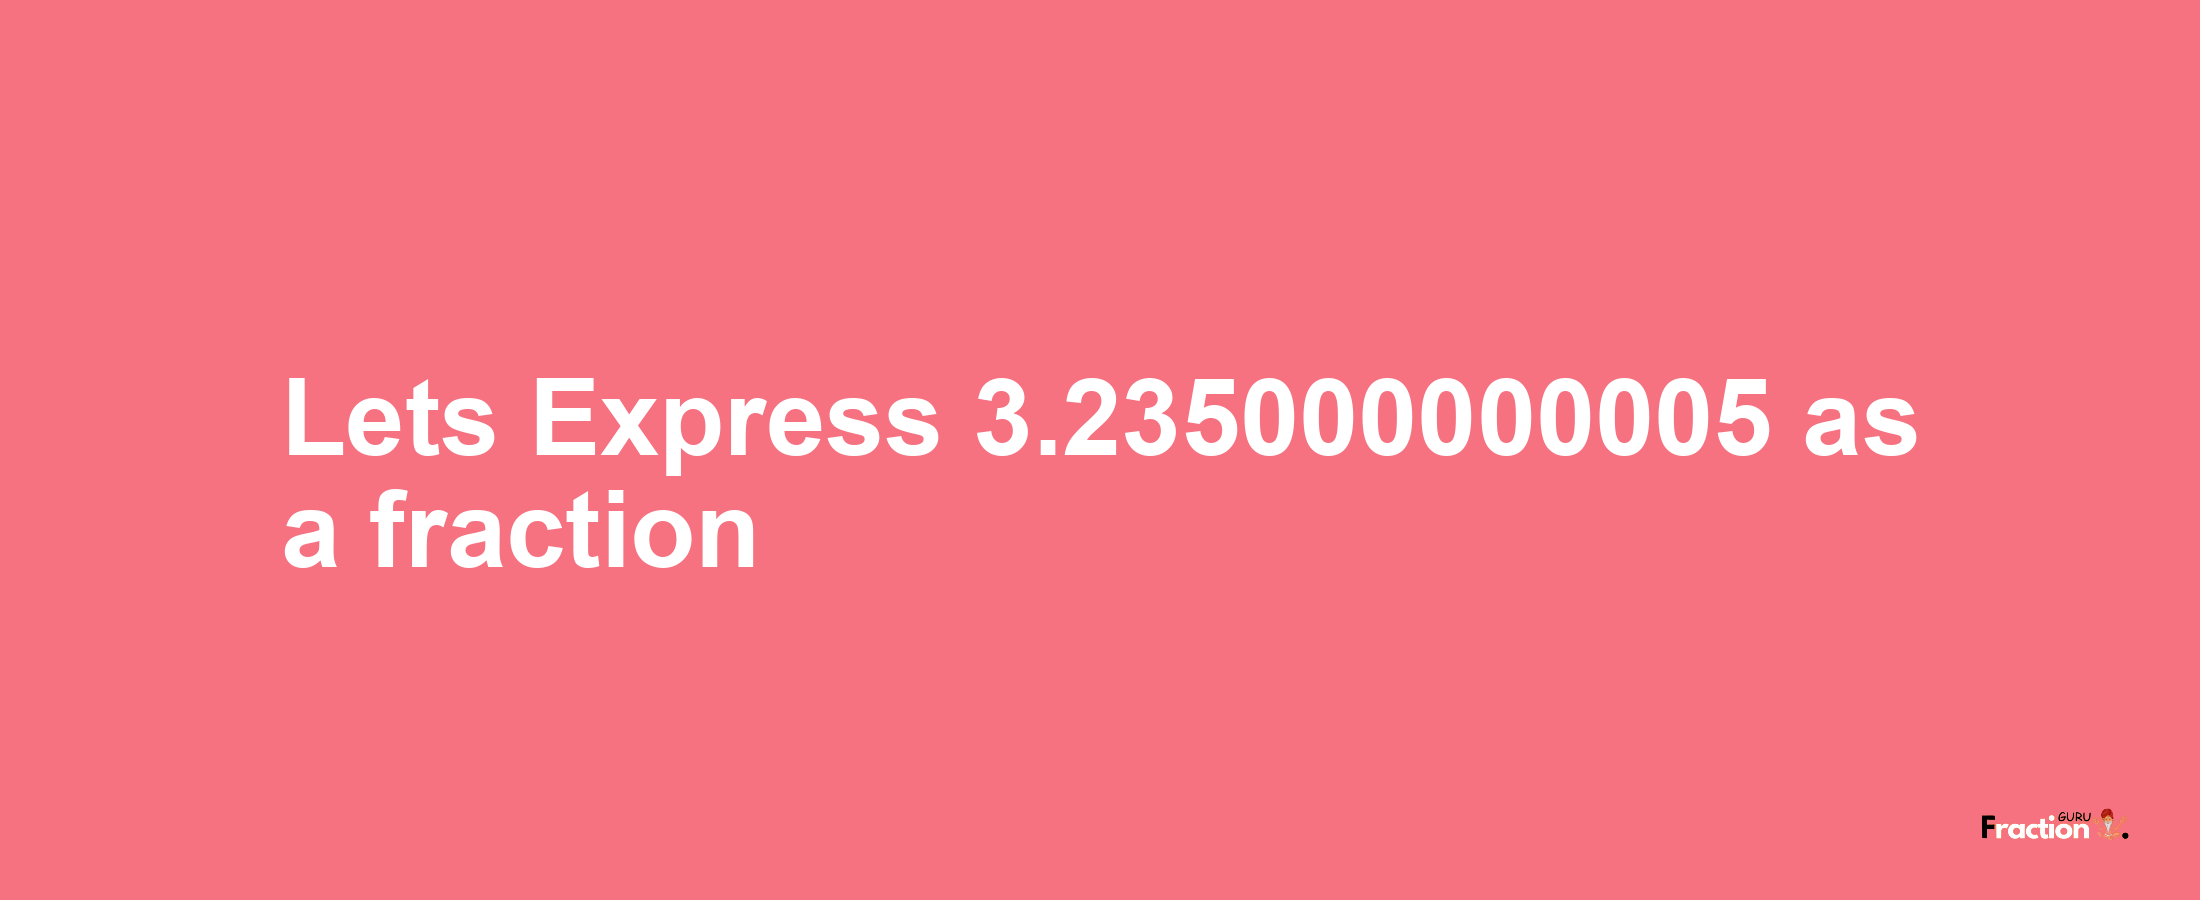 Lets Express 3.235000000005 as afraction